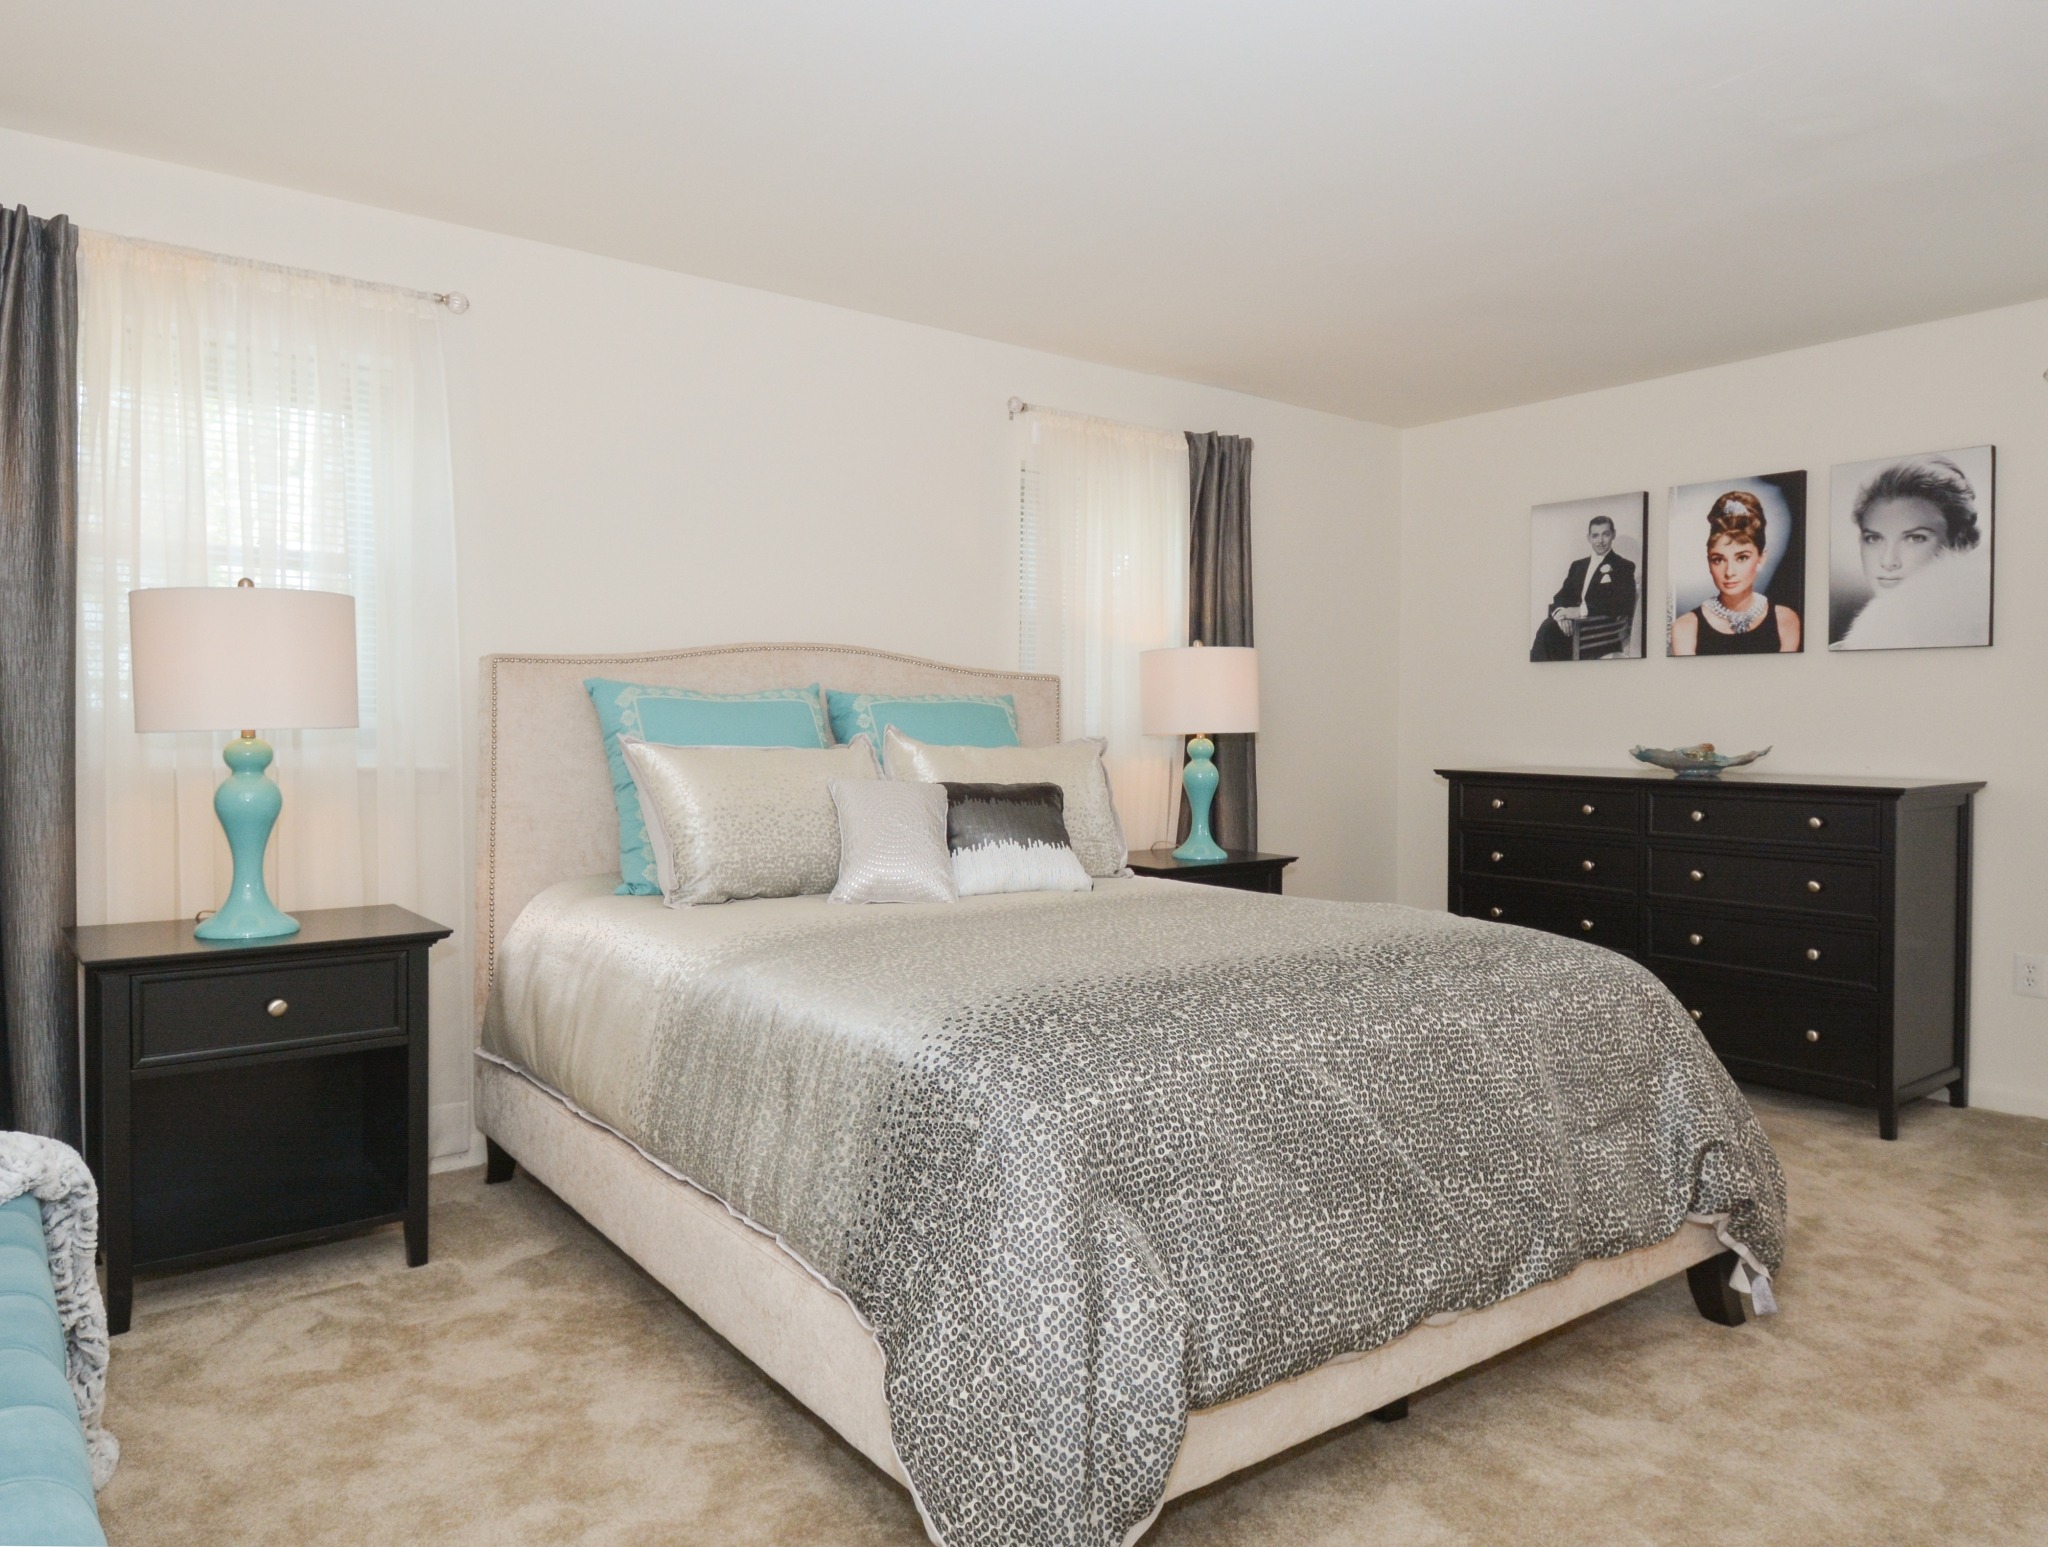 Carpeted bedroom with a bed in the middle, two nightstands, and a dresser.